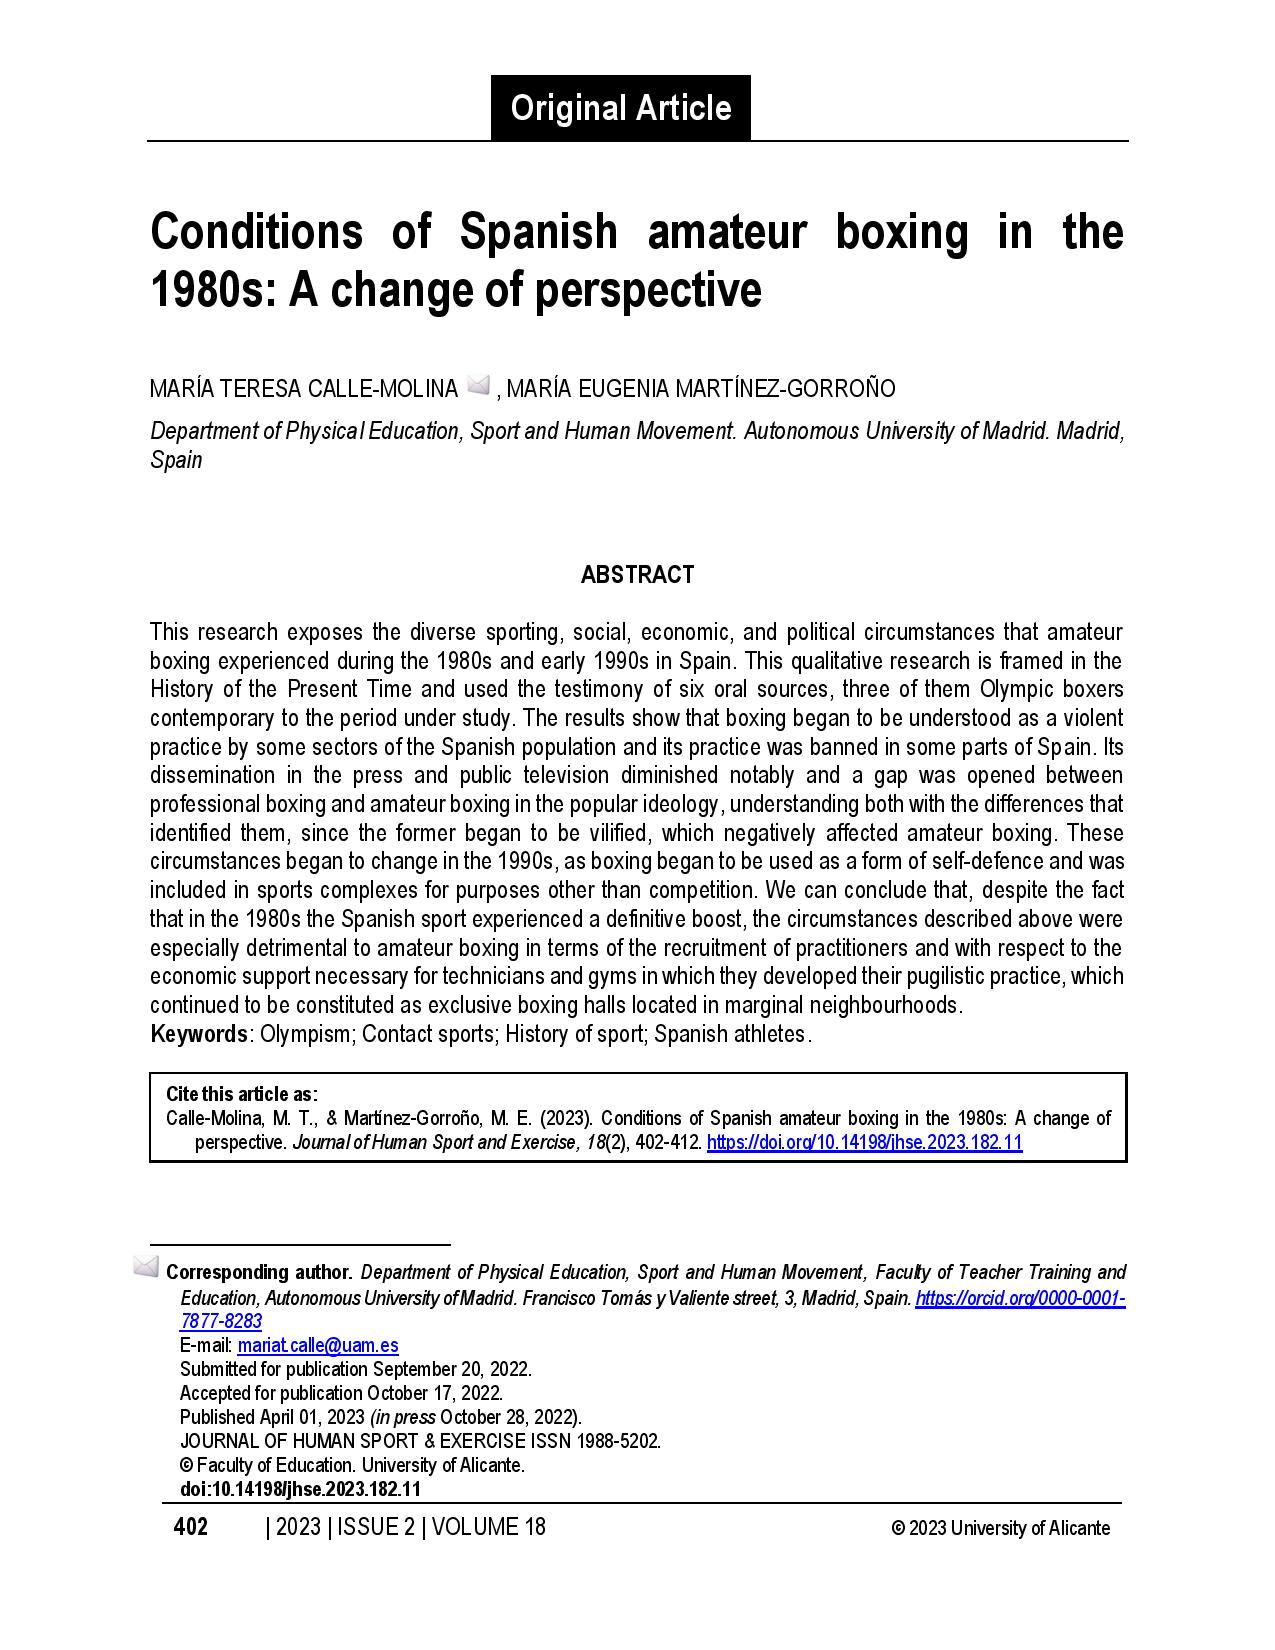 Conditions of Spanish amateur boxing in the 1980s: A change of perspective